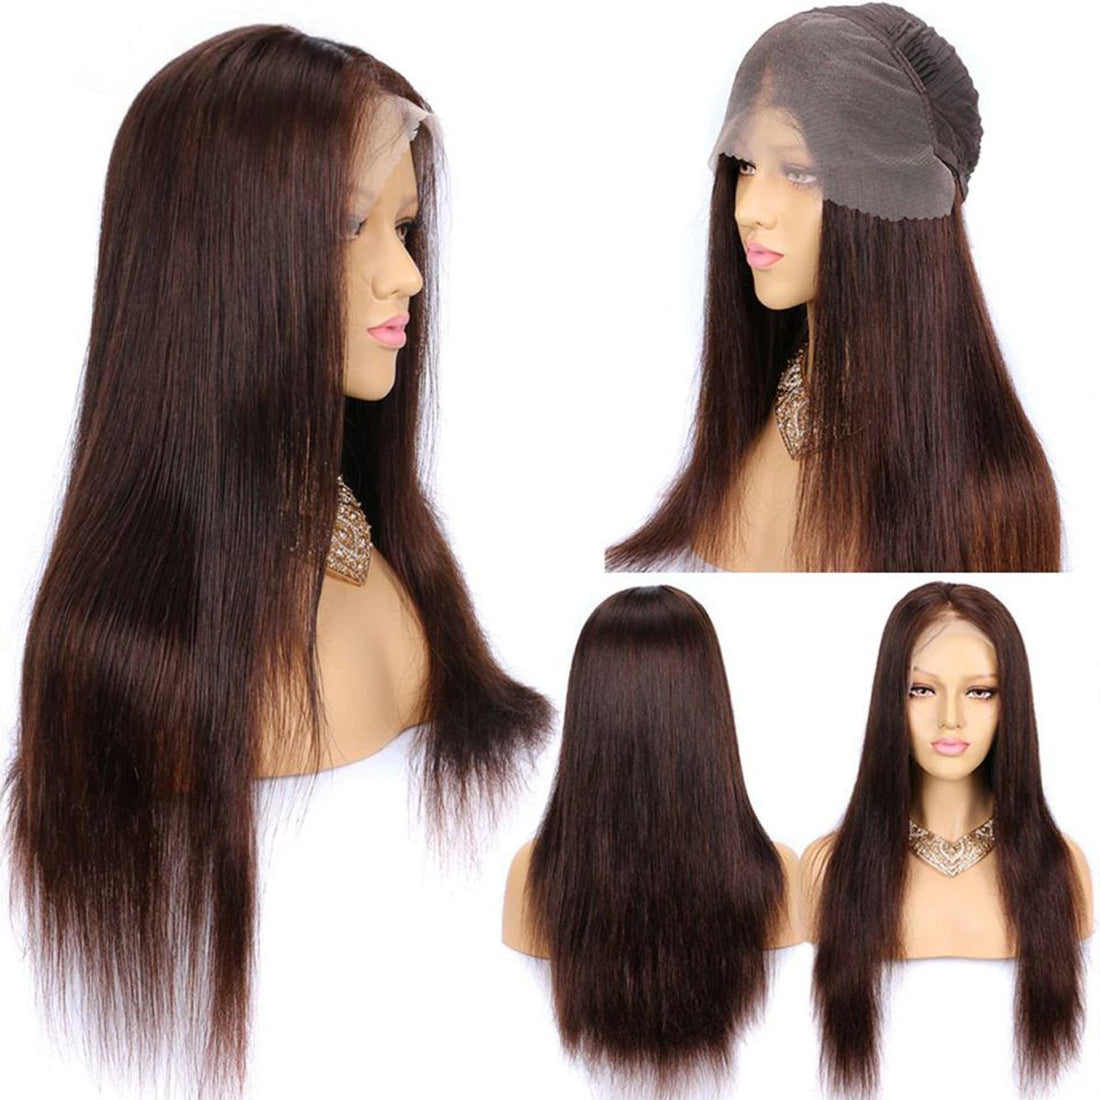 Rose Hair Brown Color Straight Hair 13x4 Lace Front Wig Human Hair Wig For Black Women